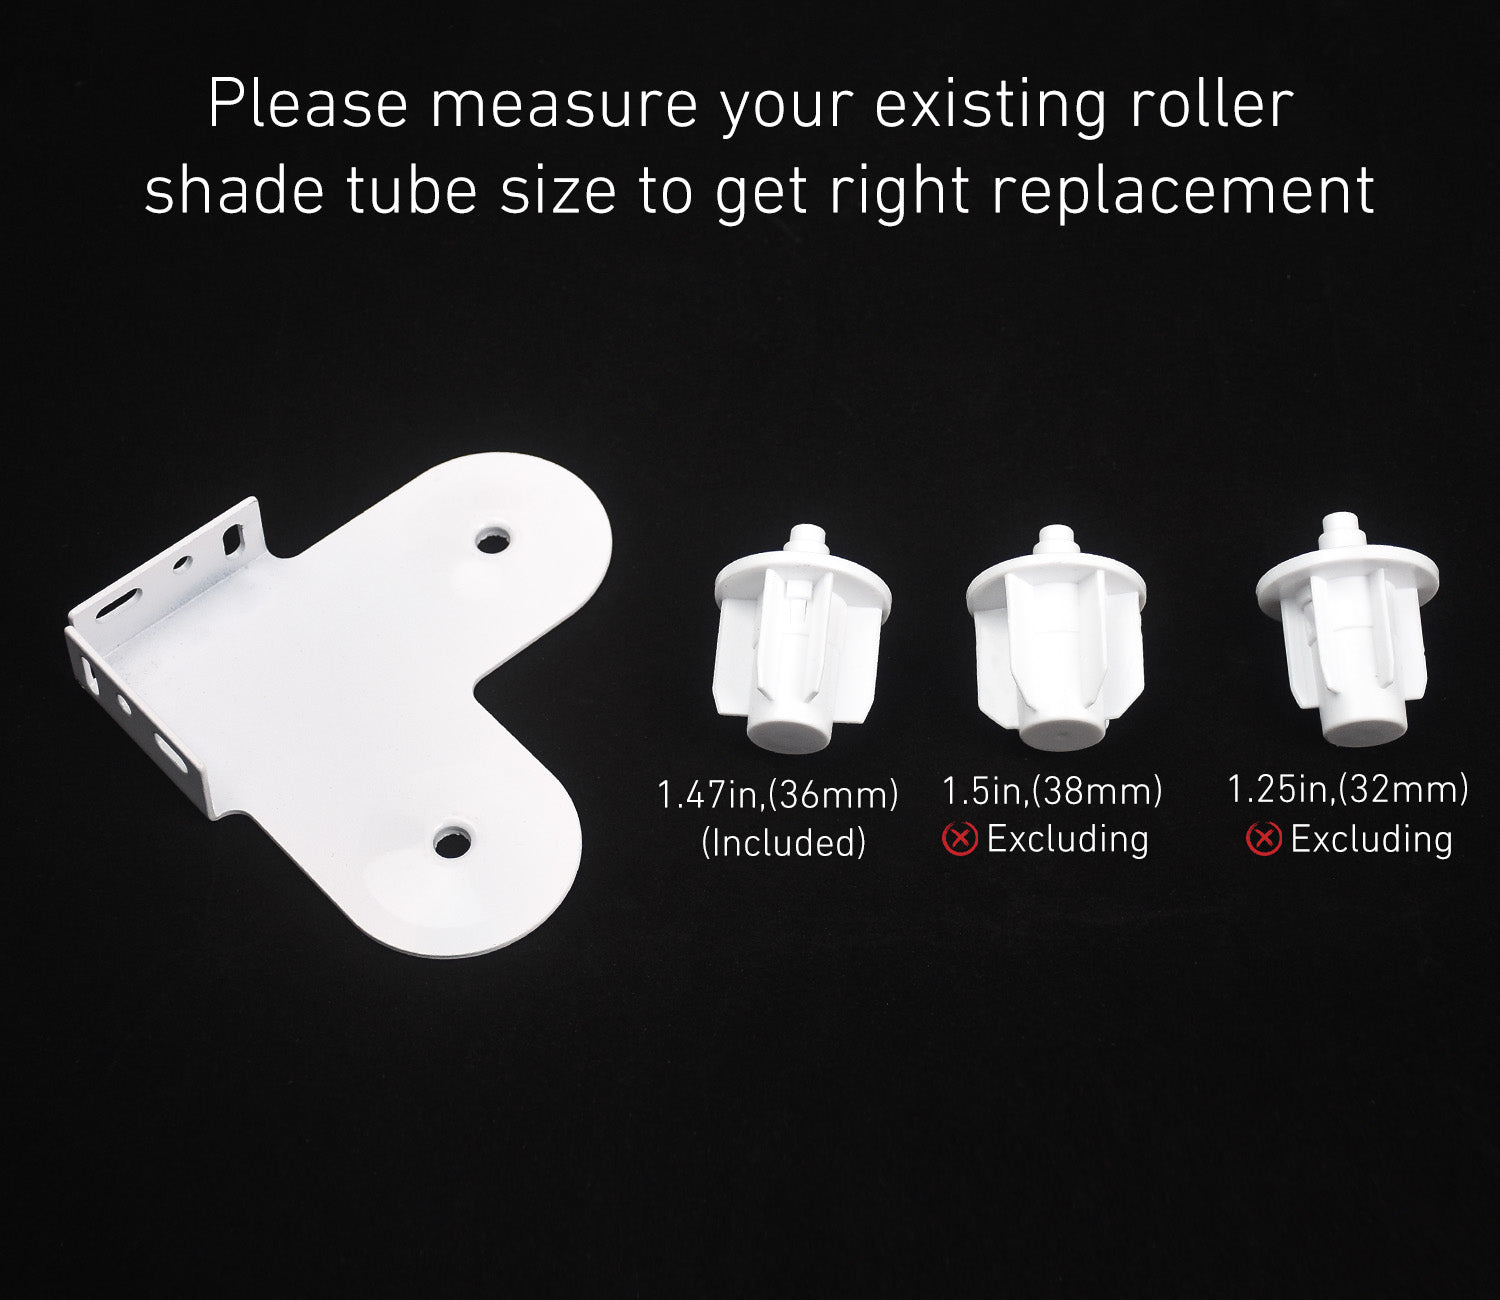 Double Roller Blind Bracket -Roller Blinds Replacement Parts Kit for 1.5"(38mm) Tube.